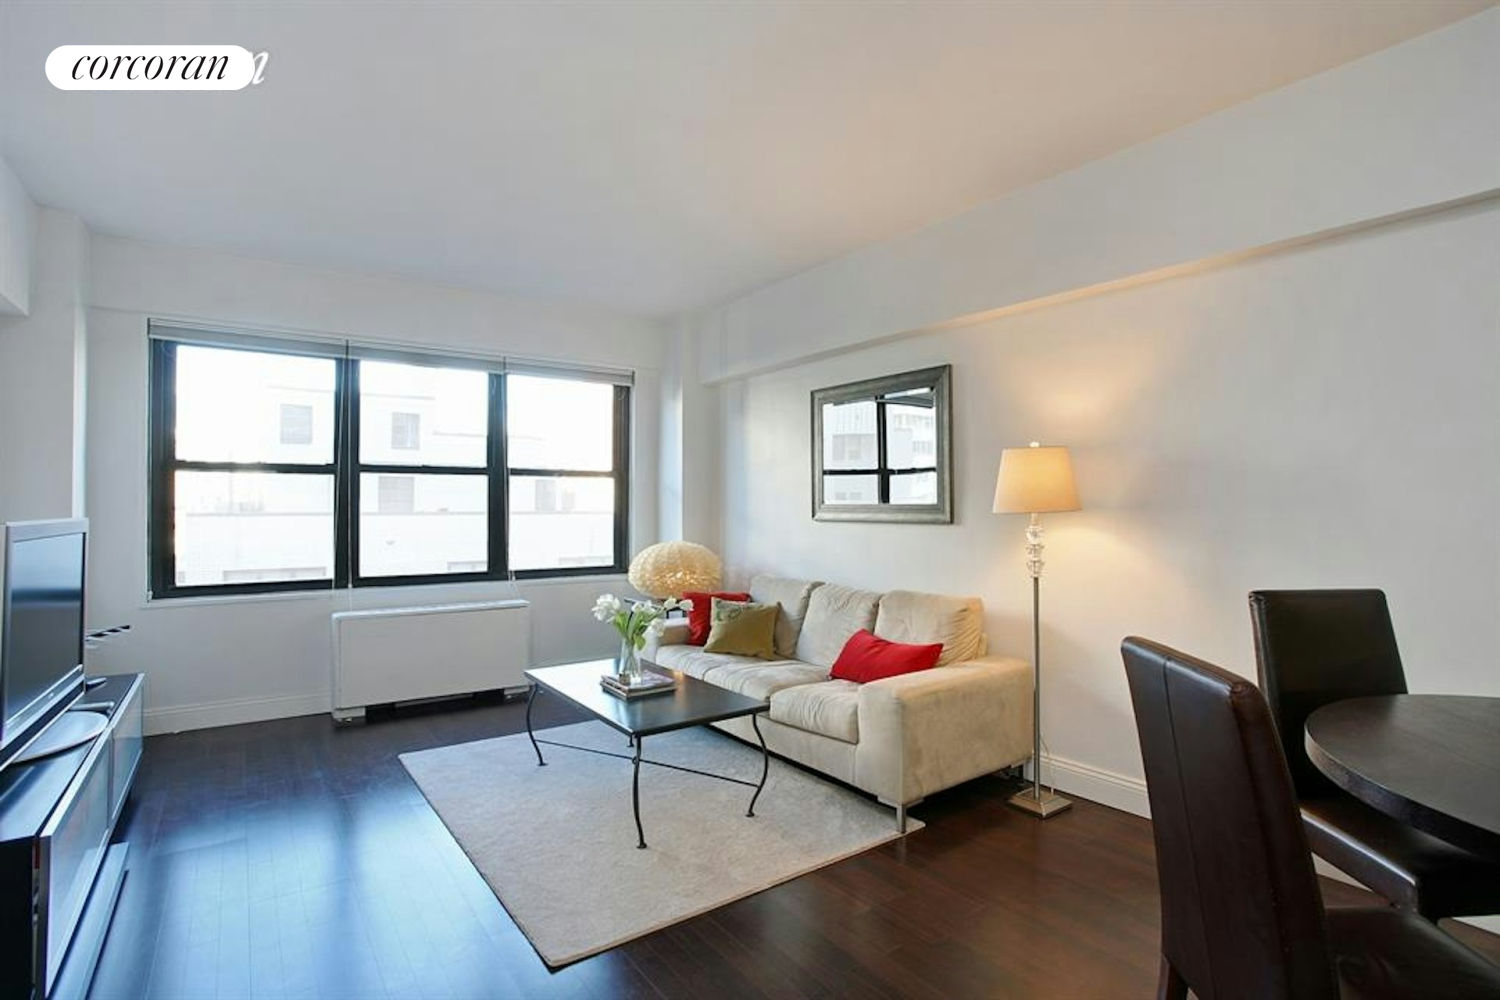 225 East 57th Street 16A, Sutton, Midtown East, NYC - 1 Bedrooms  
1 Bathrooms  
3 Rooms - 